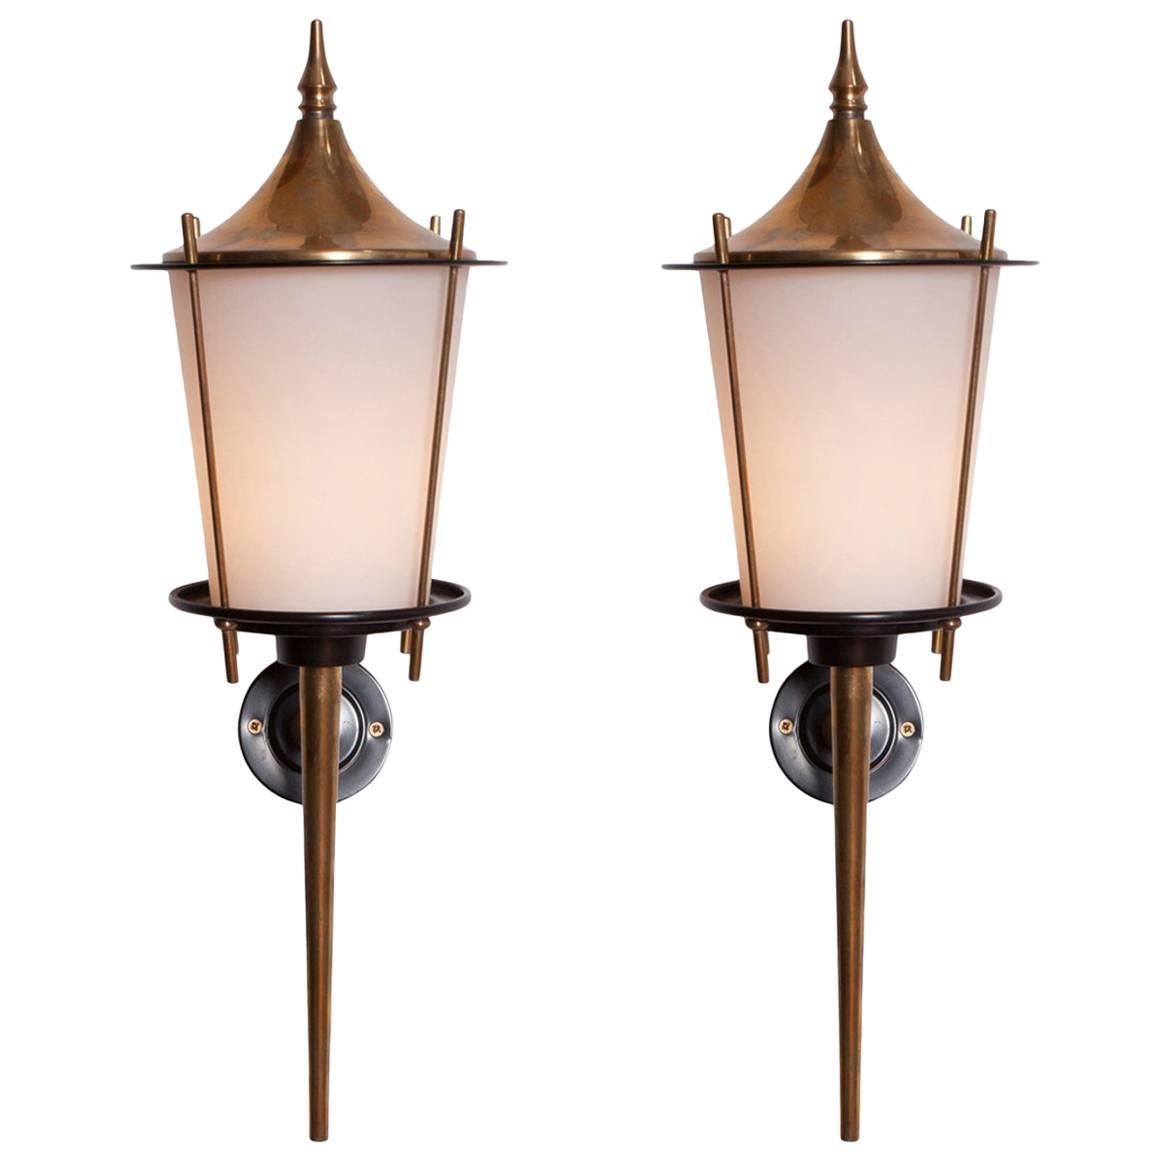 Hollywood regency pair of brass sconces by Maison Arlus, 1970s